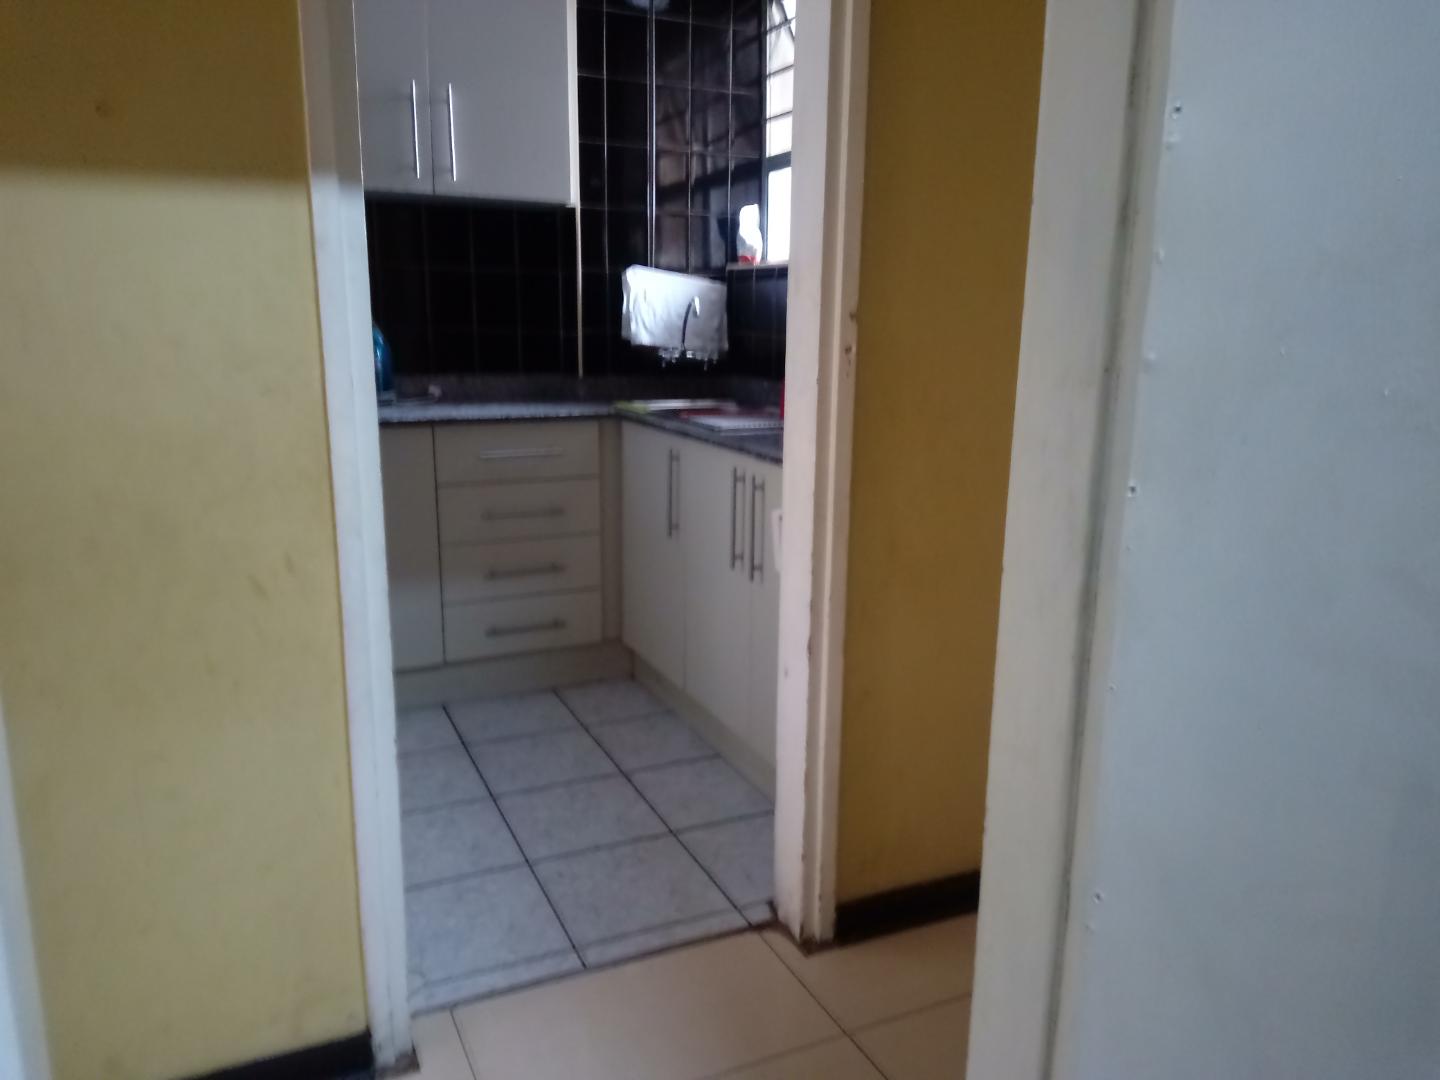 Affordable unit for sale in the heart of Durban CBD.